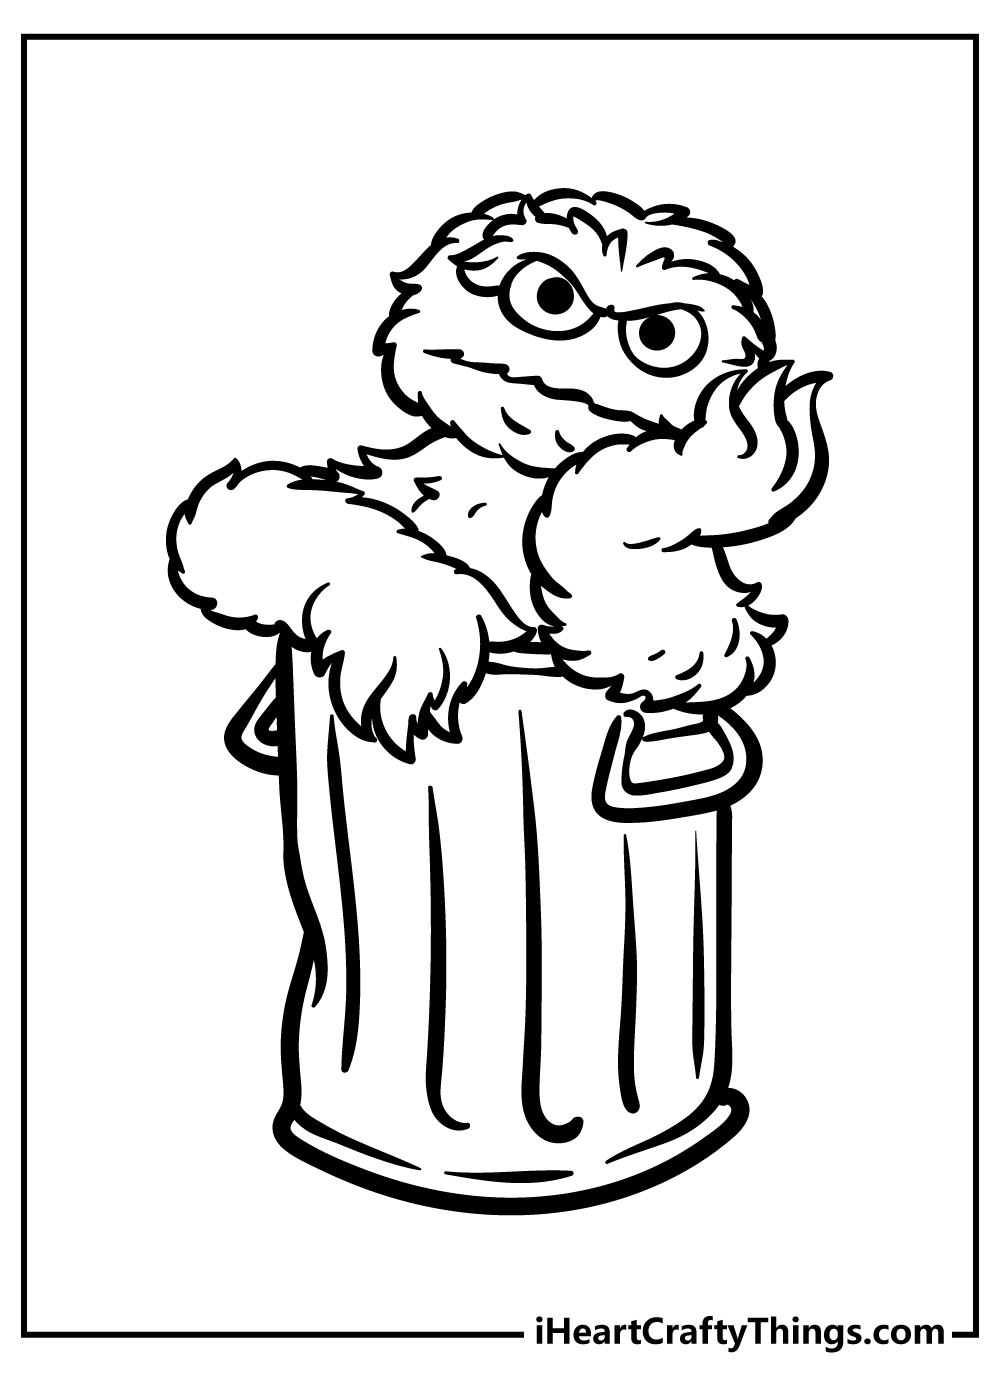 Sesame street coloring pages free printables